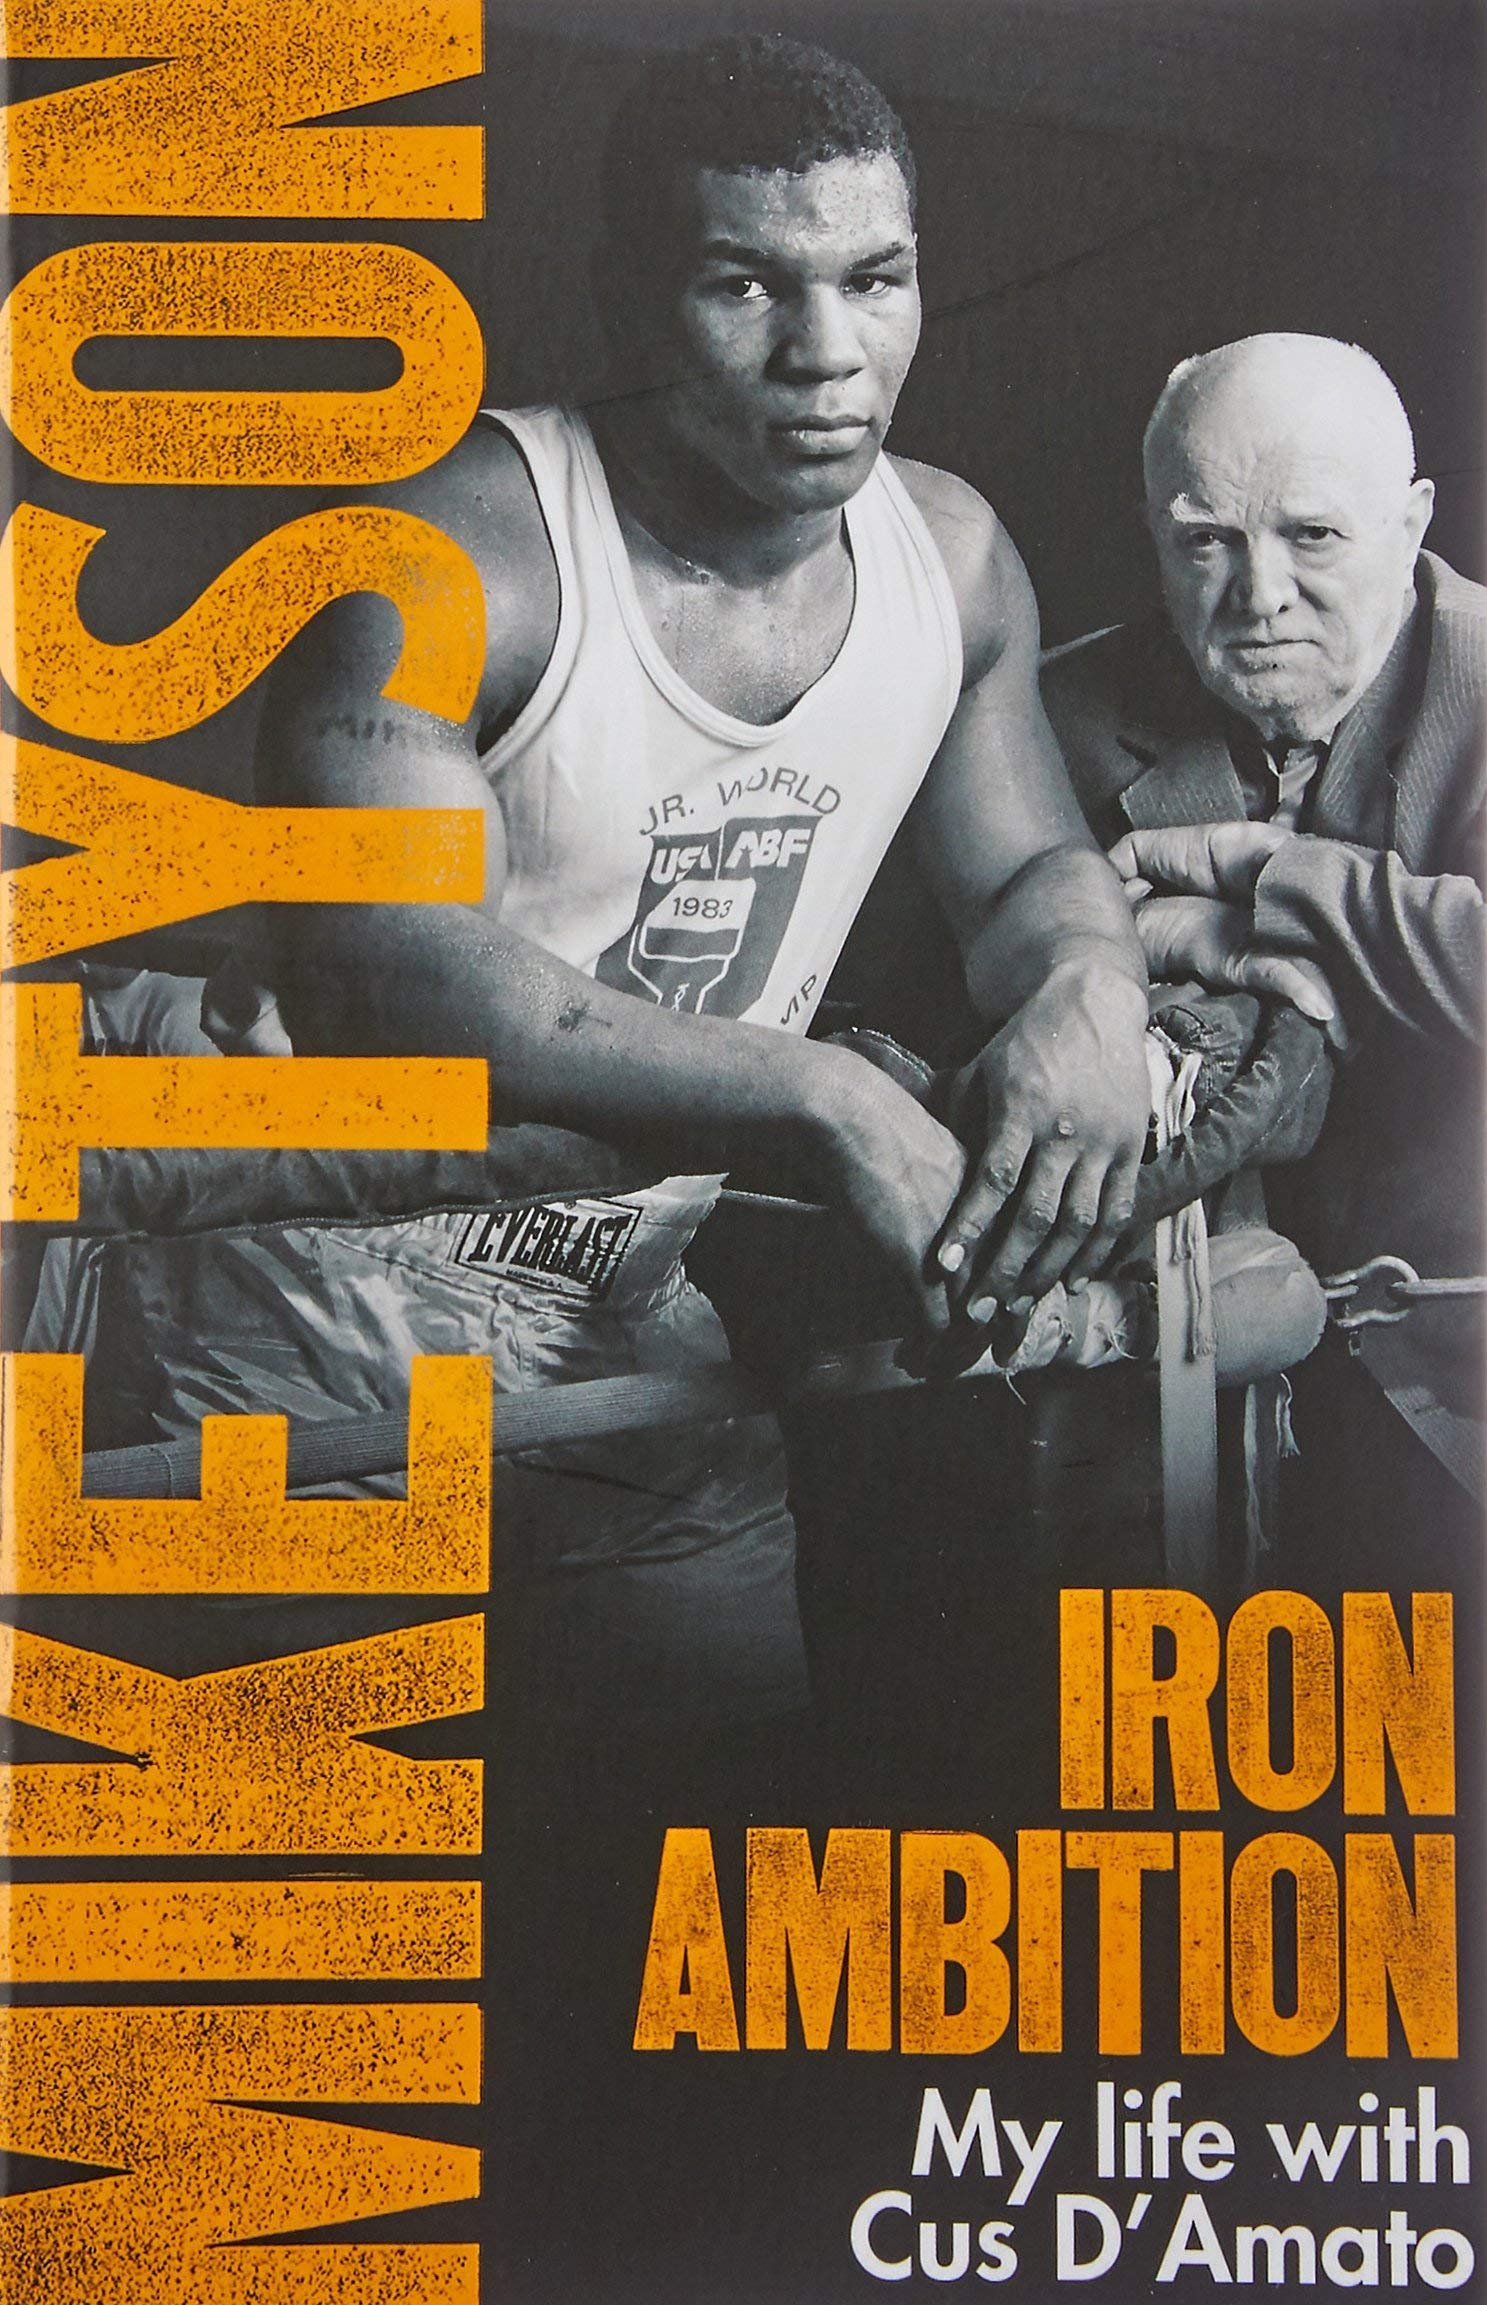 Iron Ambition. Lessons I've Learned from the Man Who Made Me a Champion